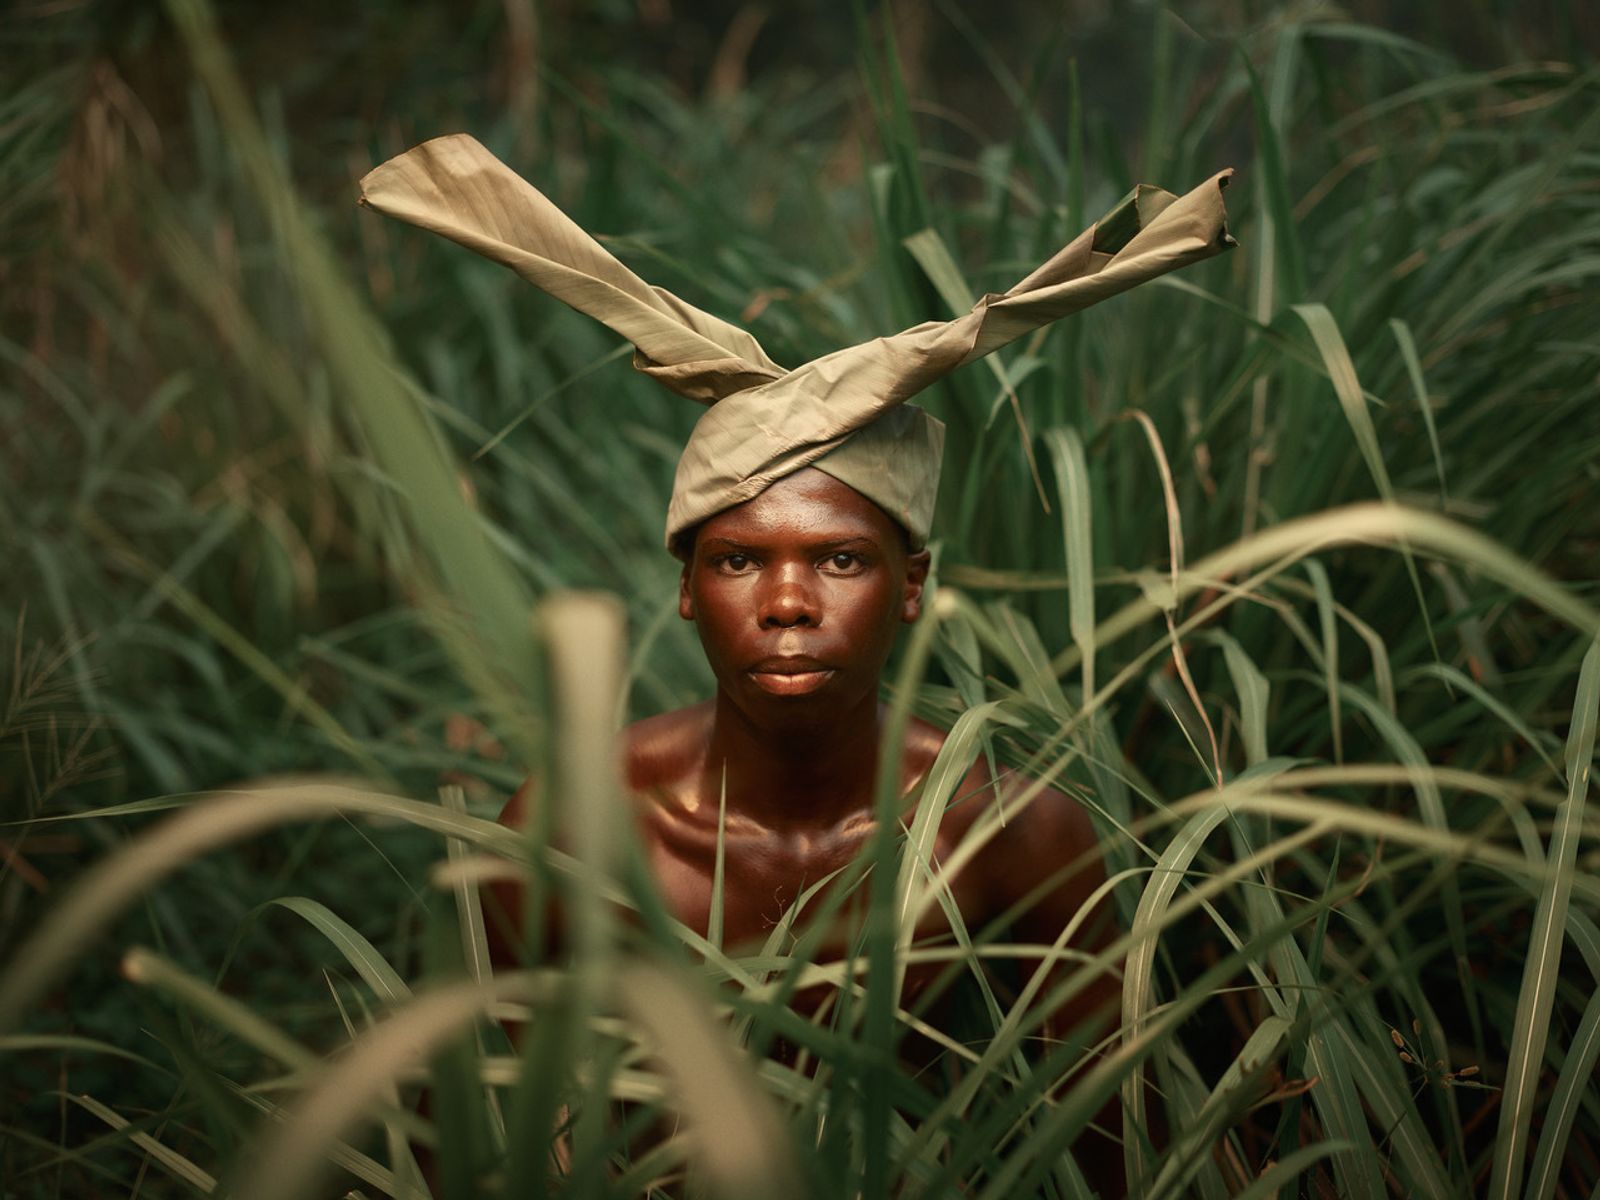 © Pieter Henket, from the series Congo Tales: Told by the People of Mbomo